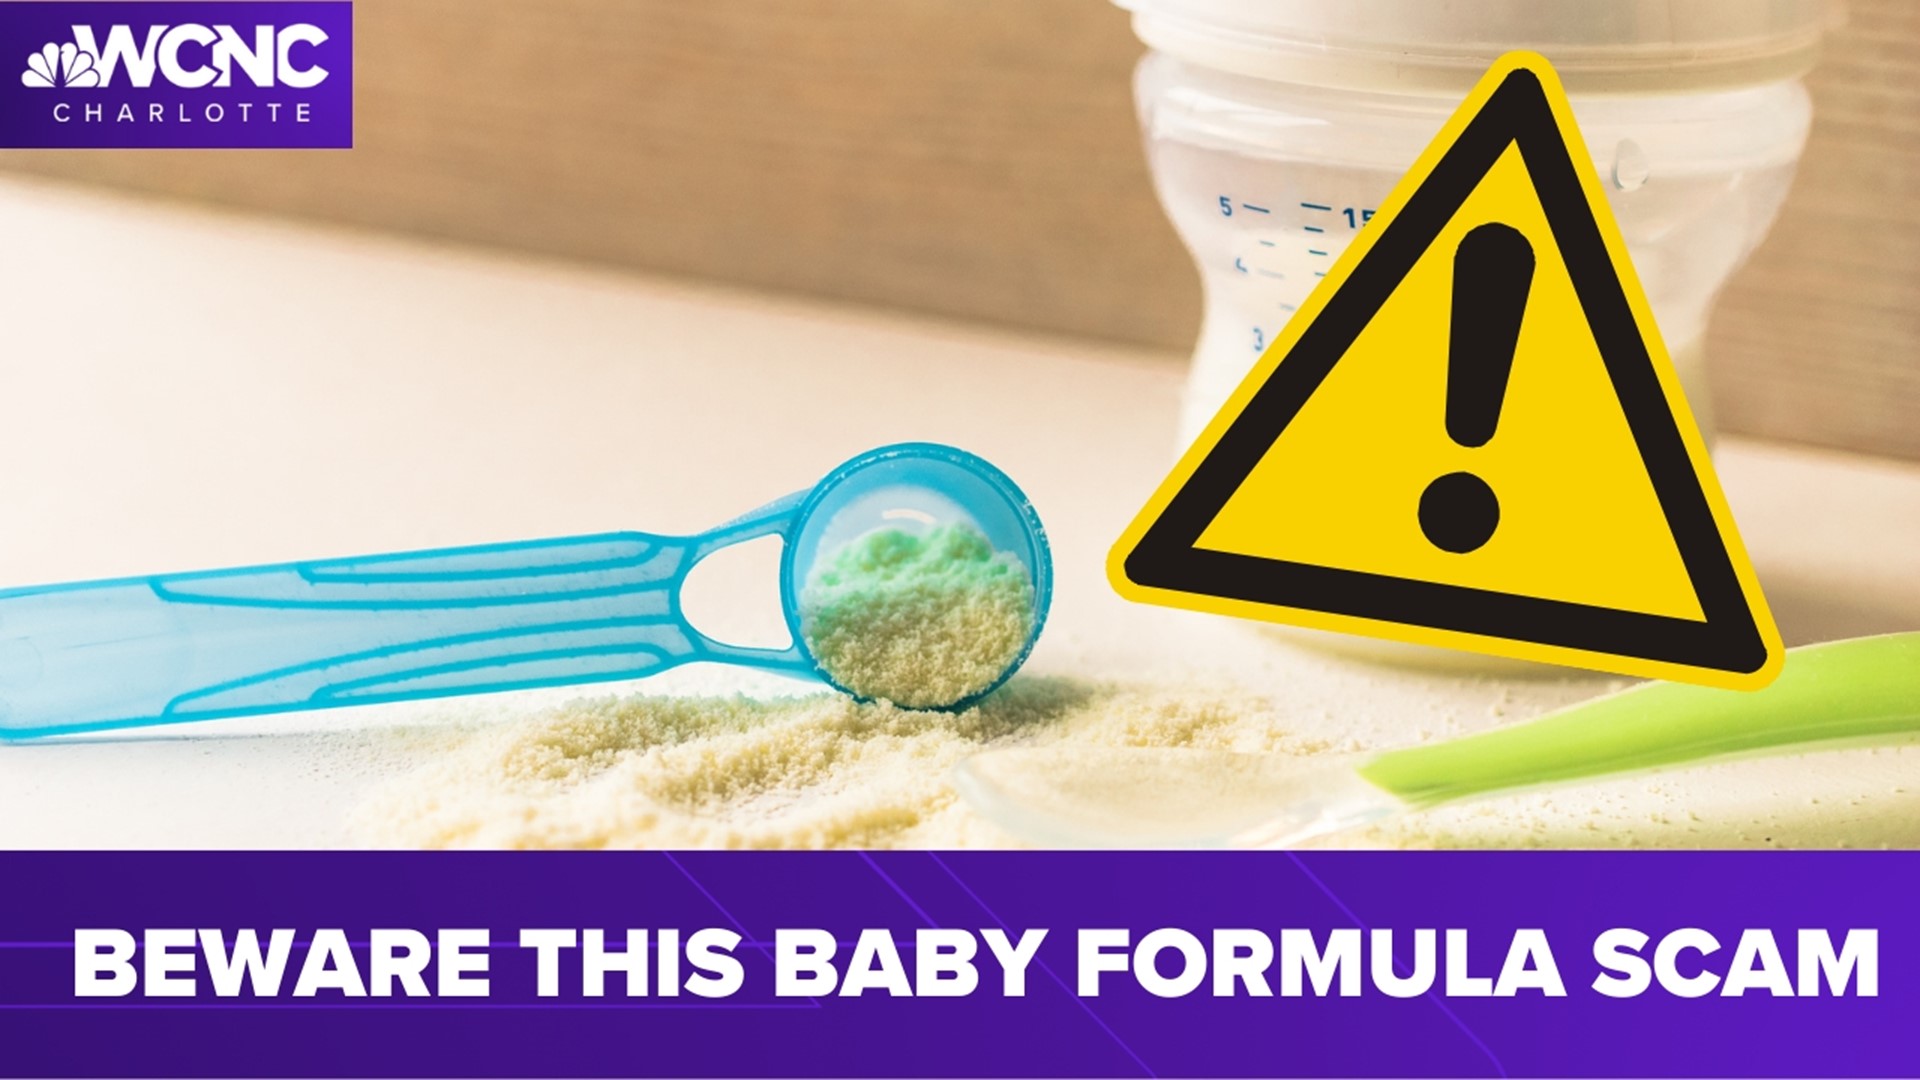 As the nationwide hunt for baby formula continues tonight, a new worry for parents: scammers taking advantage.